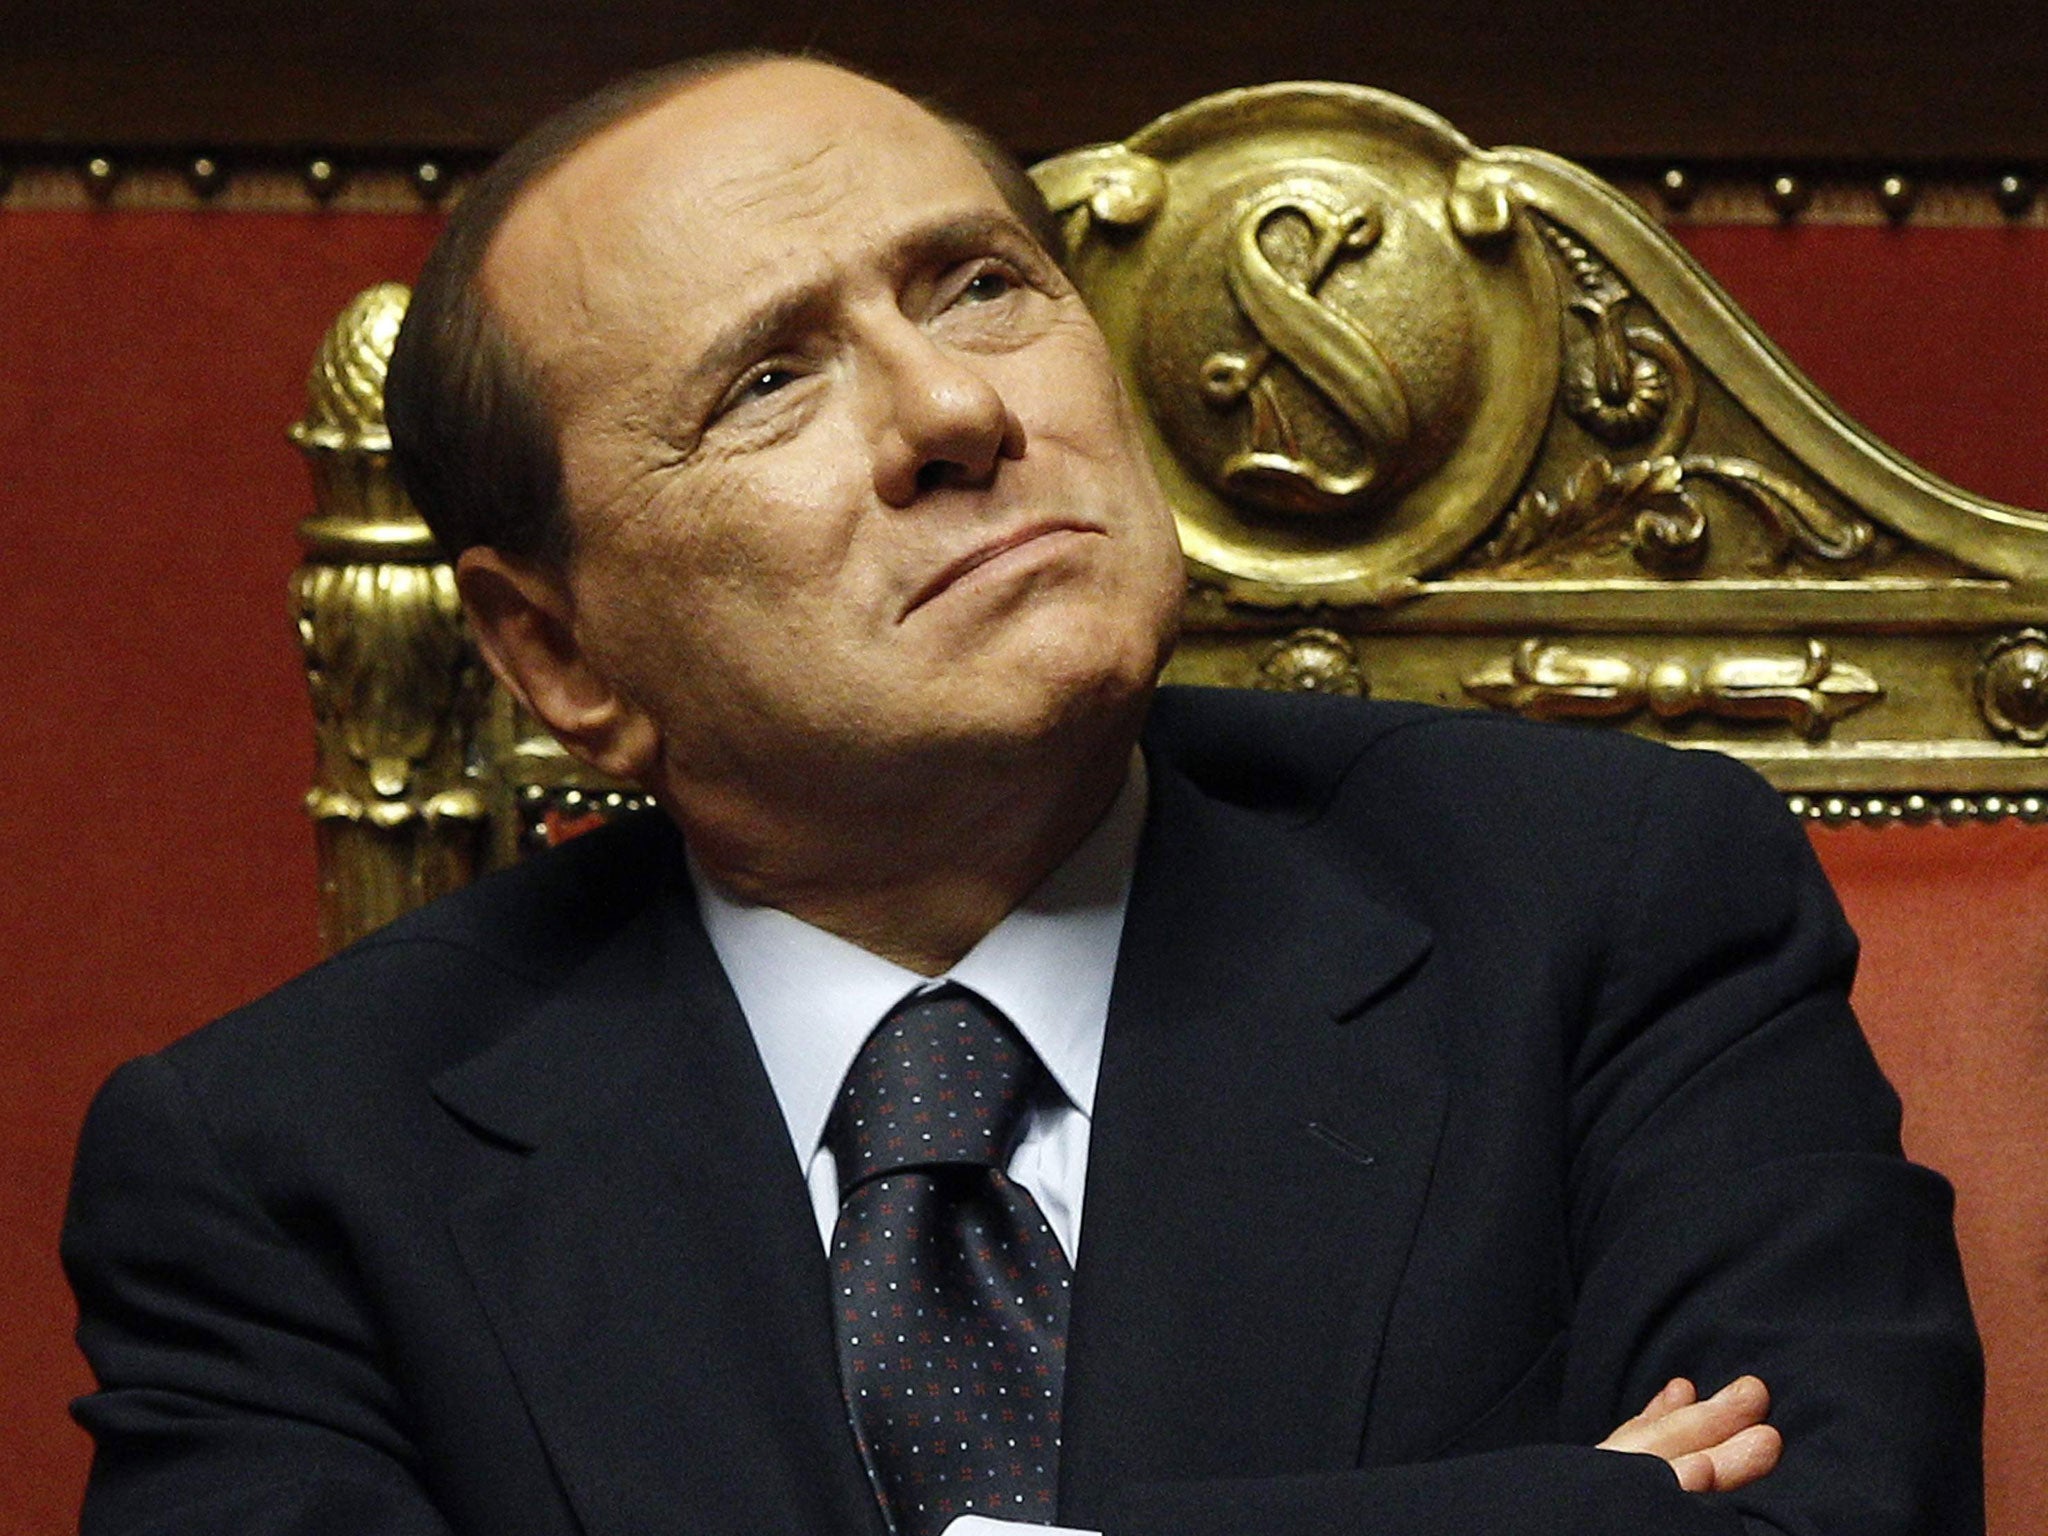 Silvio Berlusconi's PDL (People of Freedom) party abstained on a confidence vote